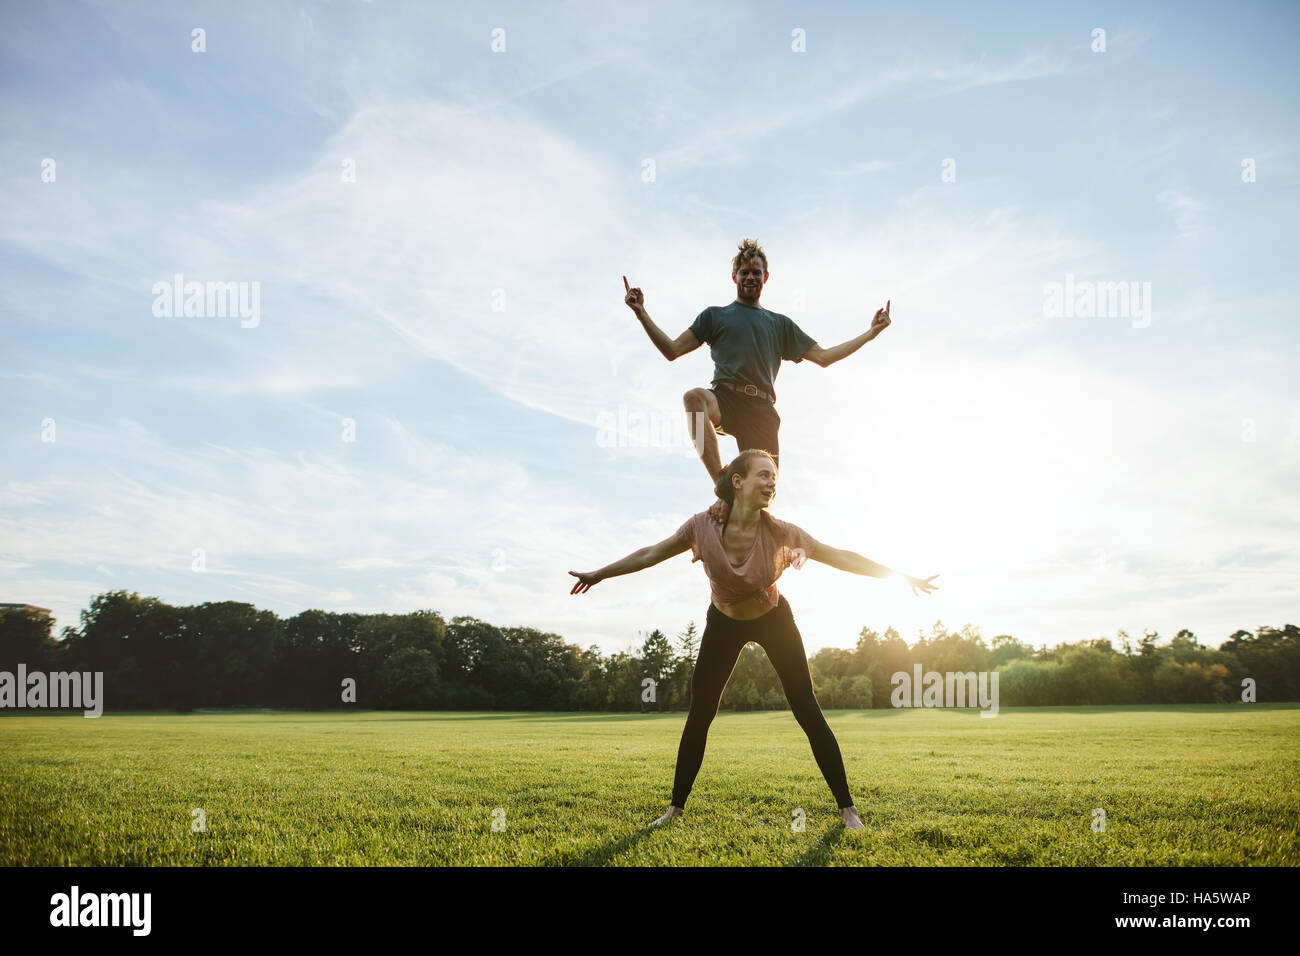 Strong young couple doing acrobatic yoga exercise in park. Man standing on back of woman and balancing. Stock Photo